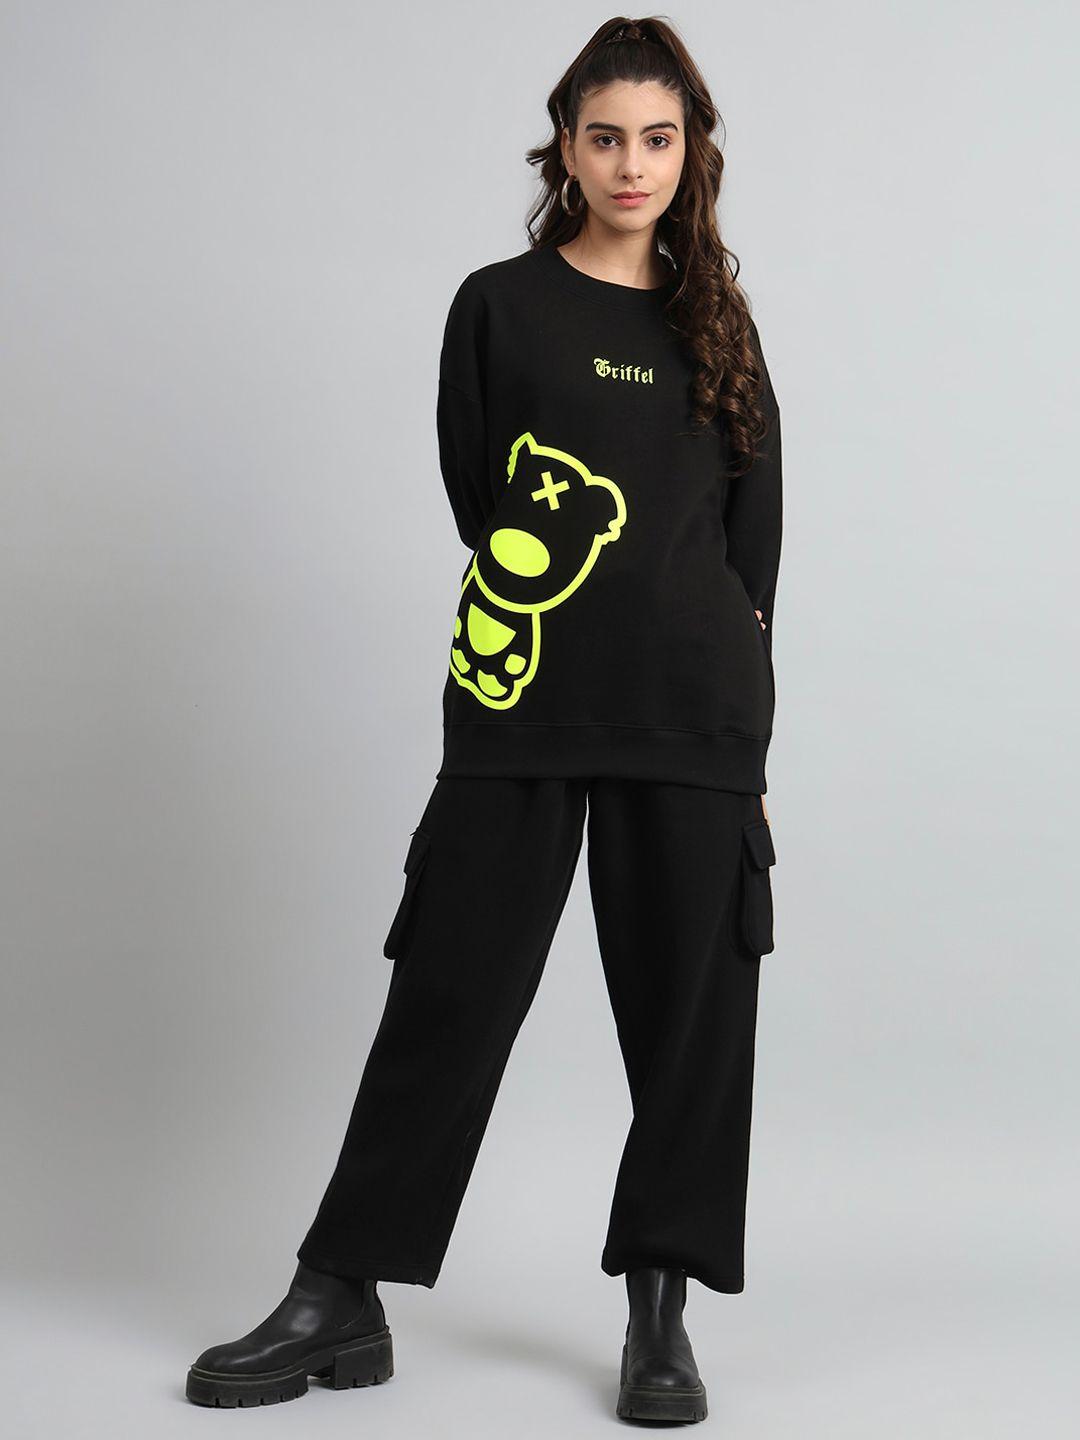 griffel graphic printed fleece cotton tracksuit